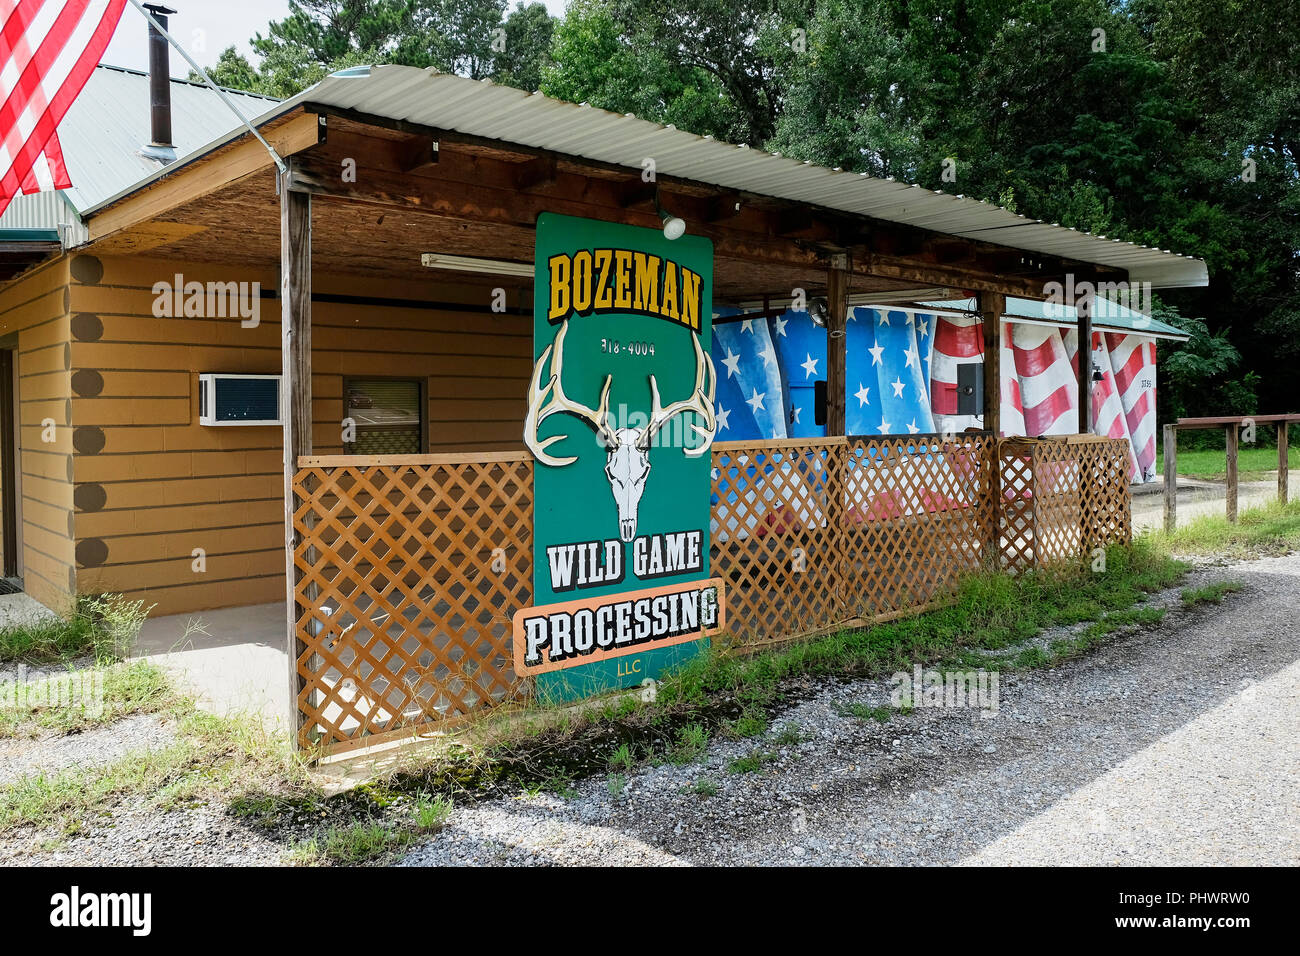 Bozeman deer and wild game processing business / building with American flag painted on the side; a feature of the American South in Alabama USA. Stock Photo